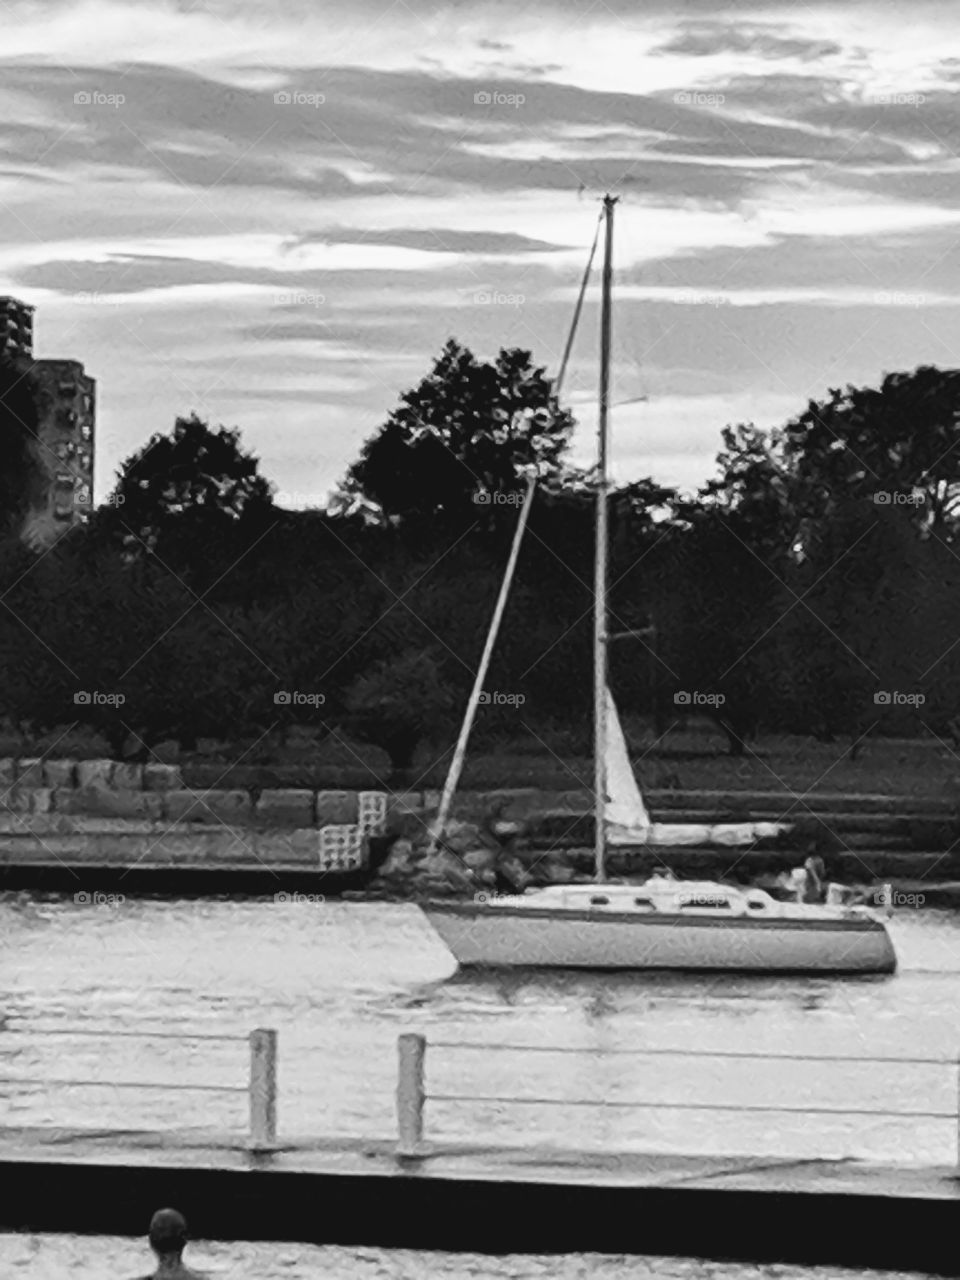 black and white sailboat in city harbor